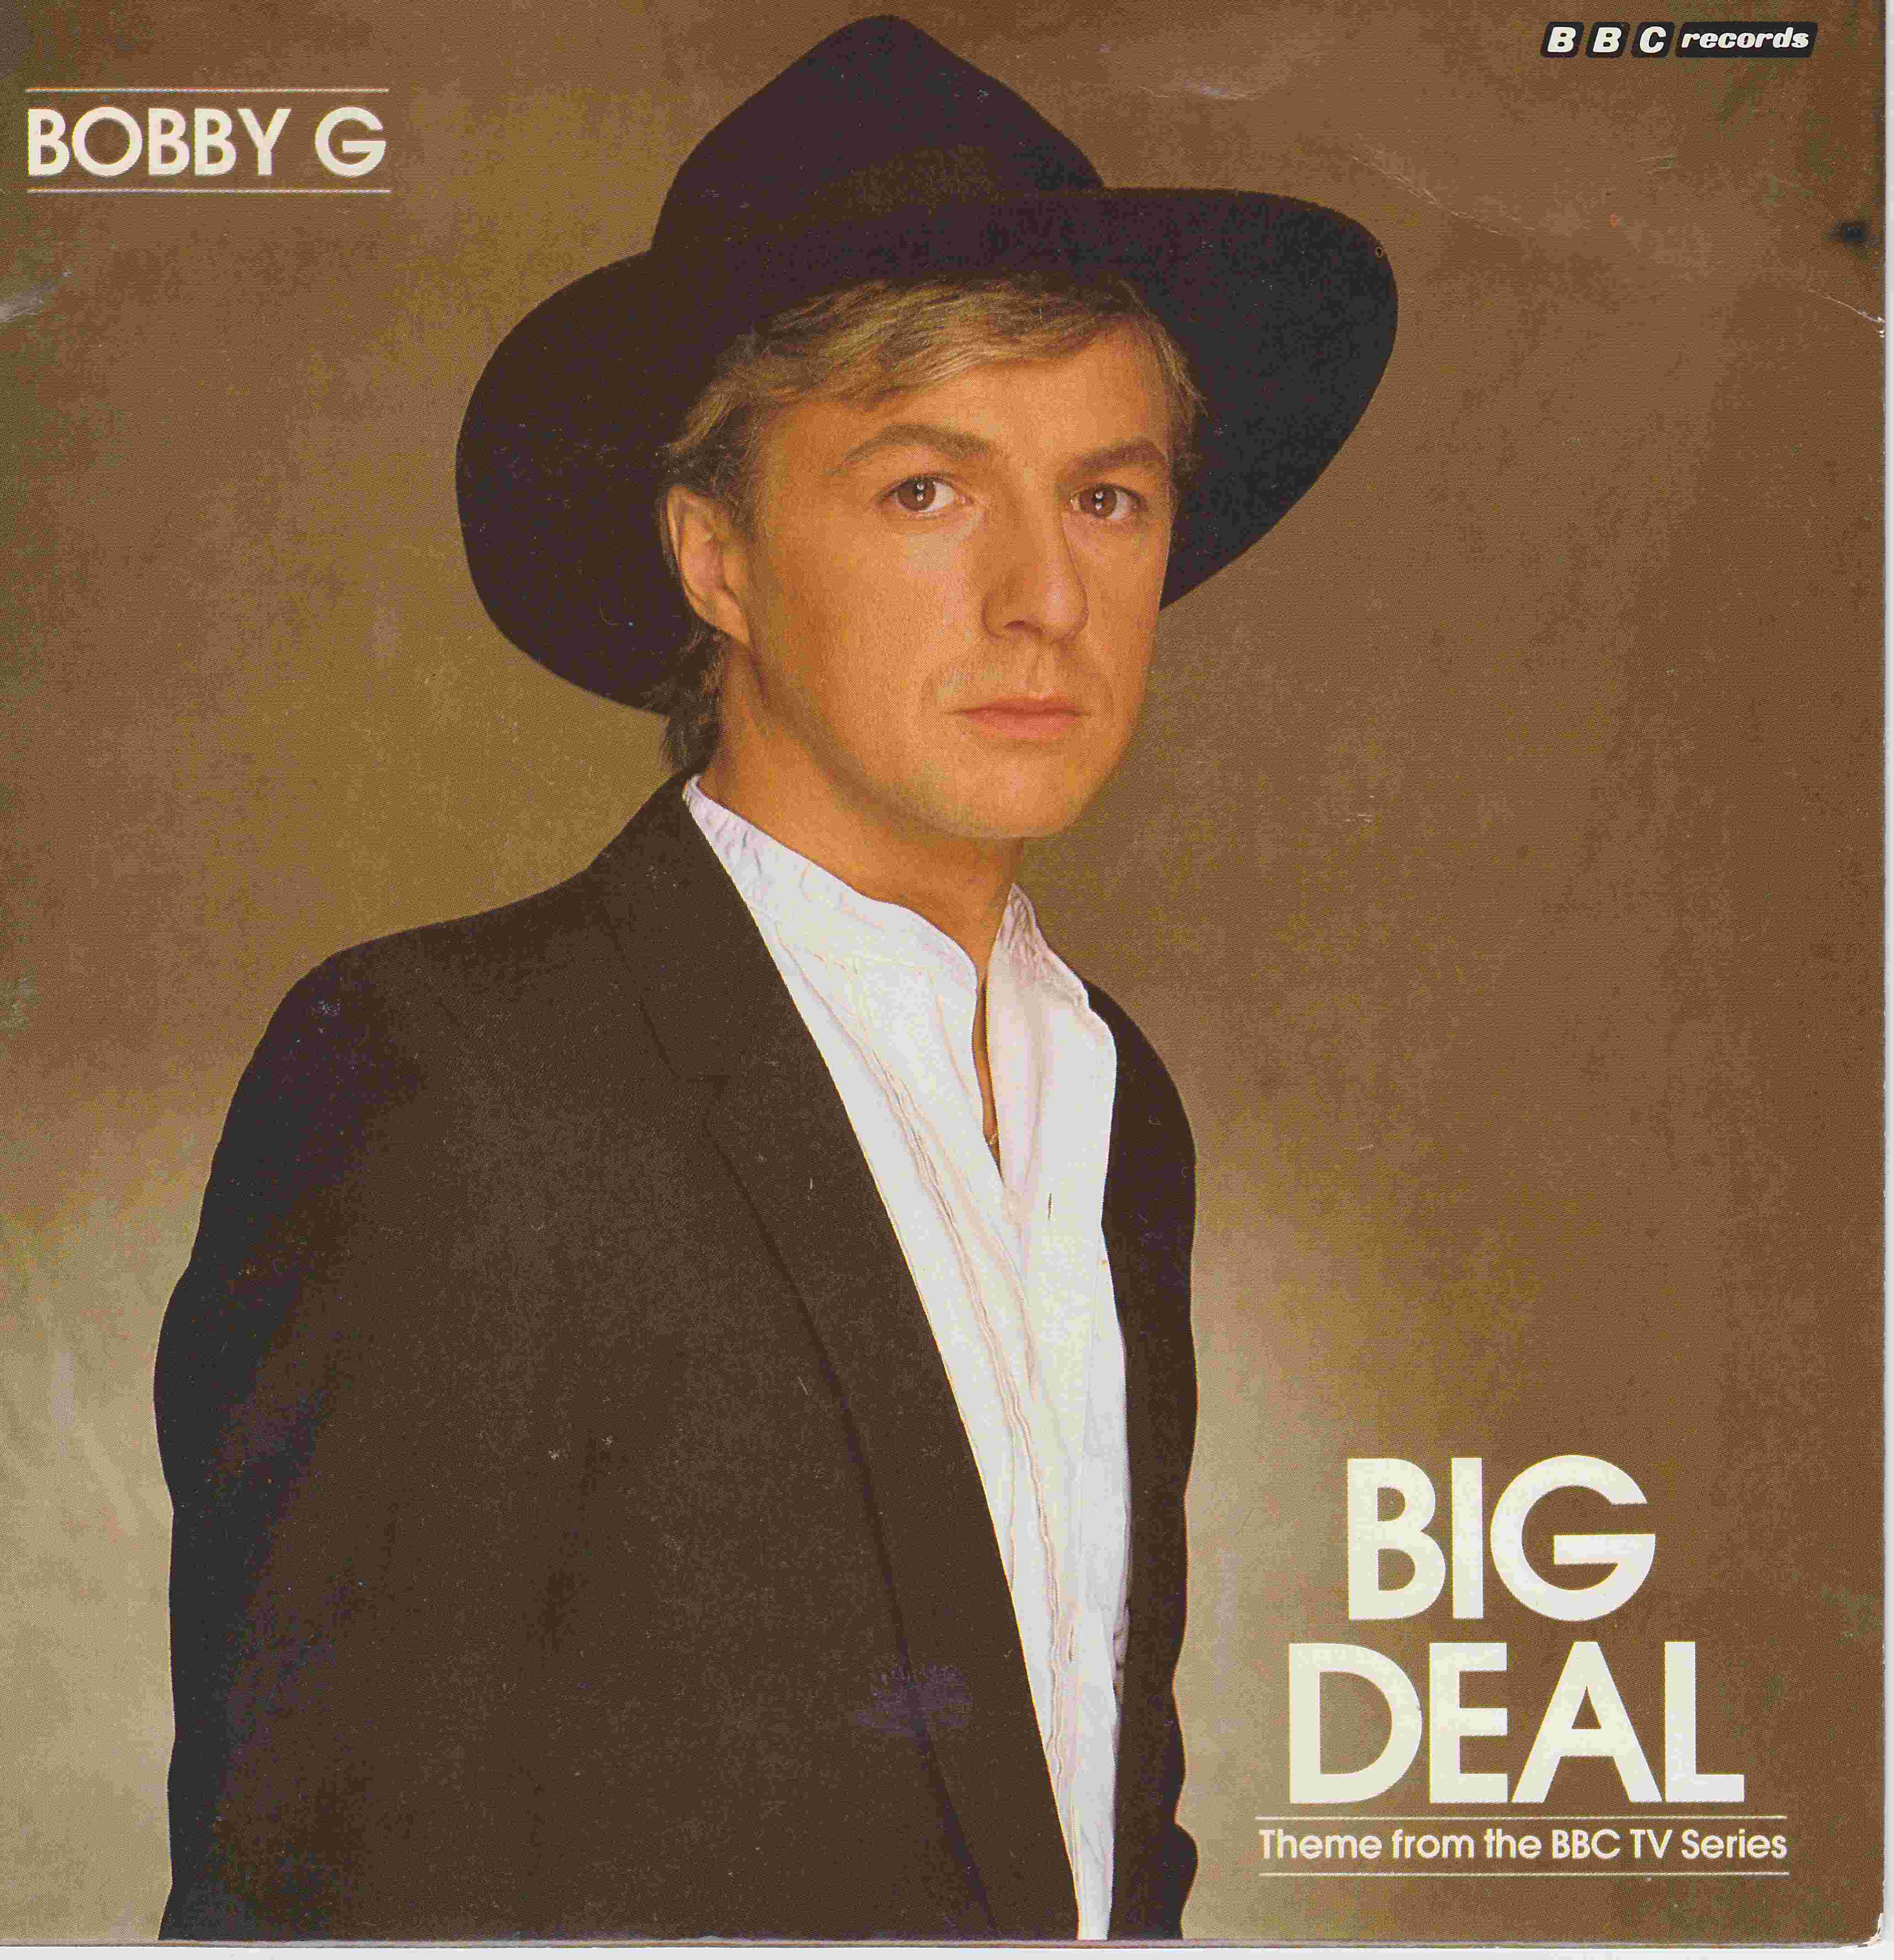 Picture of Big deal by artist Bobby G from the BBC singles - Records and Tapes library